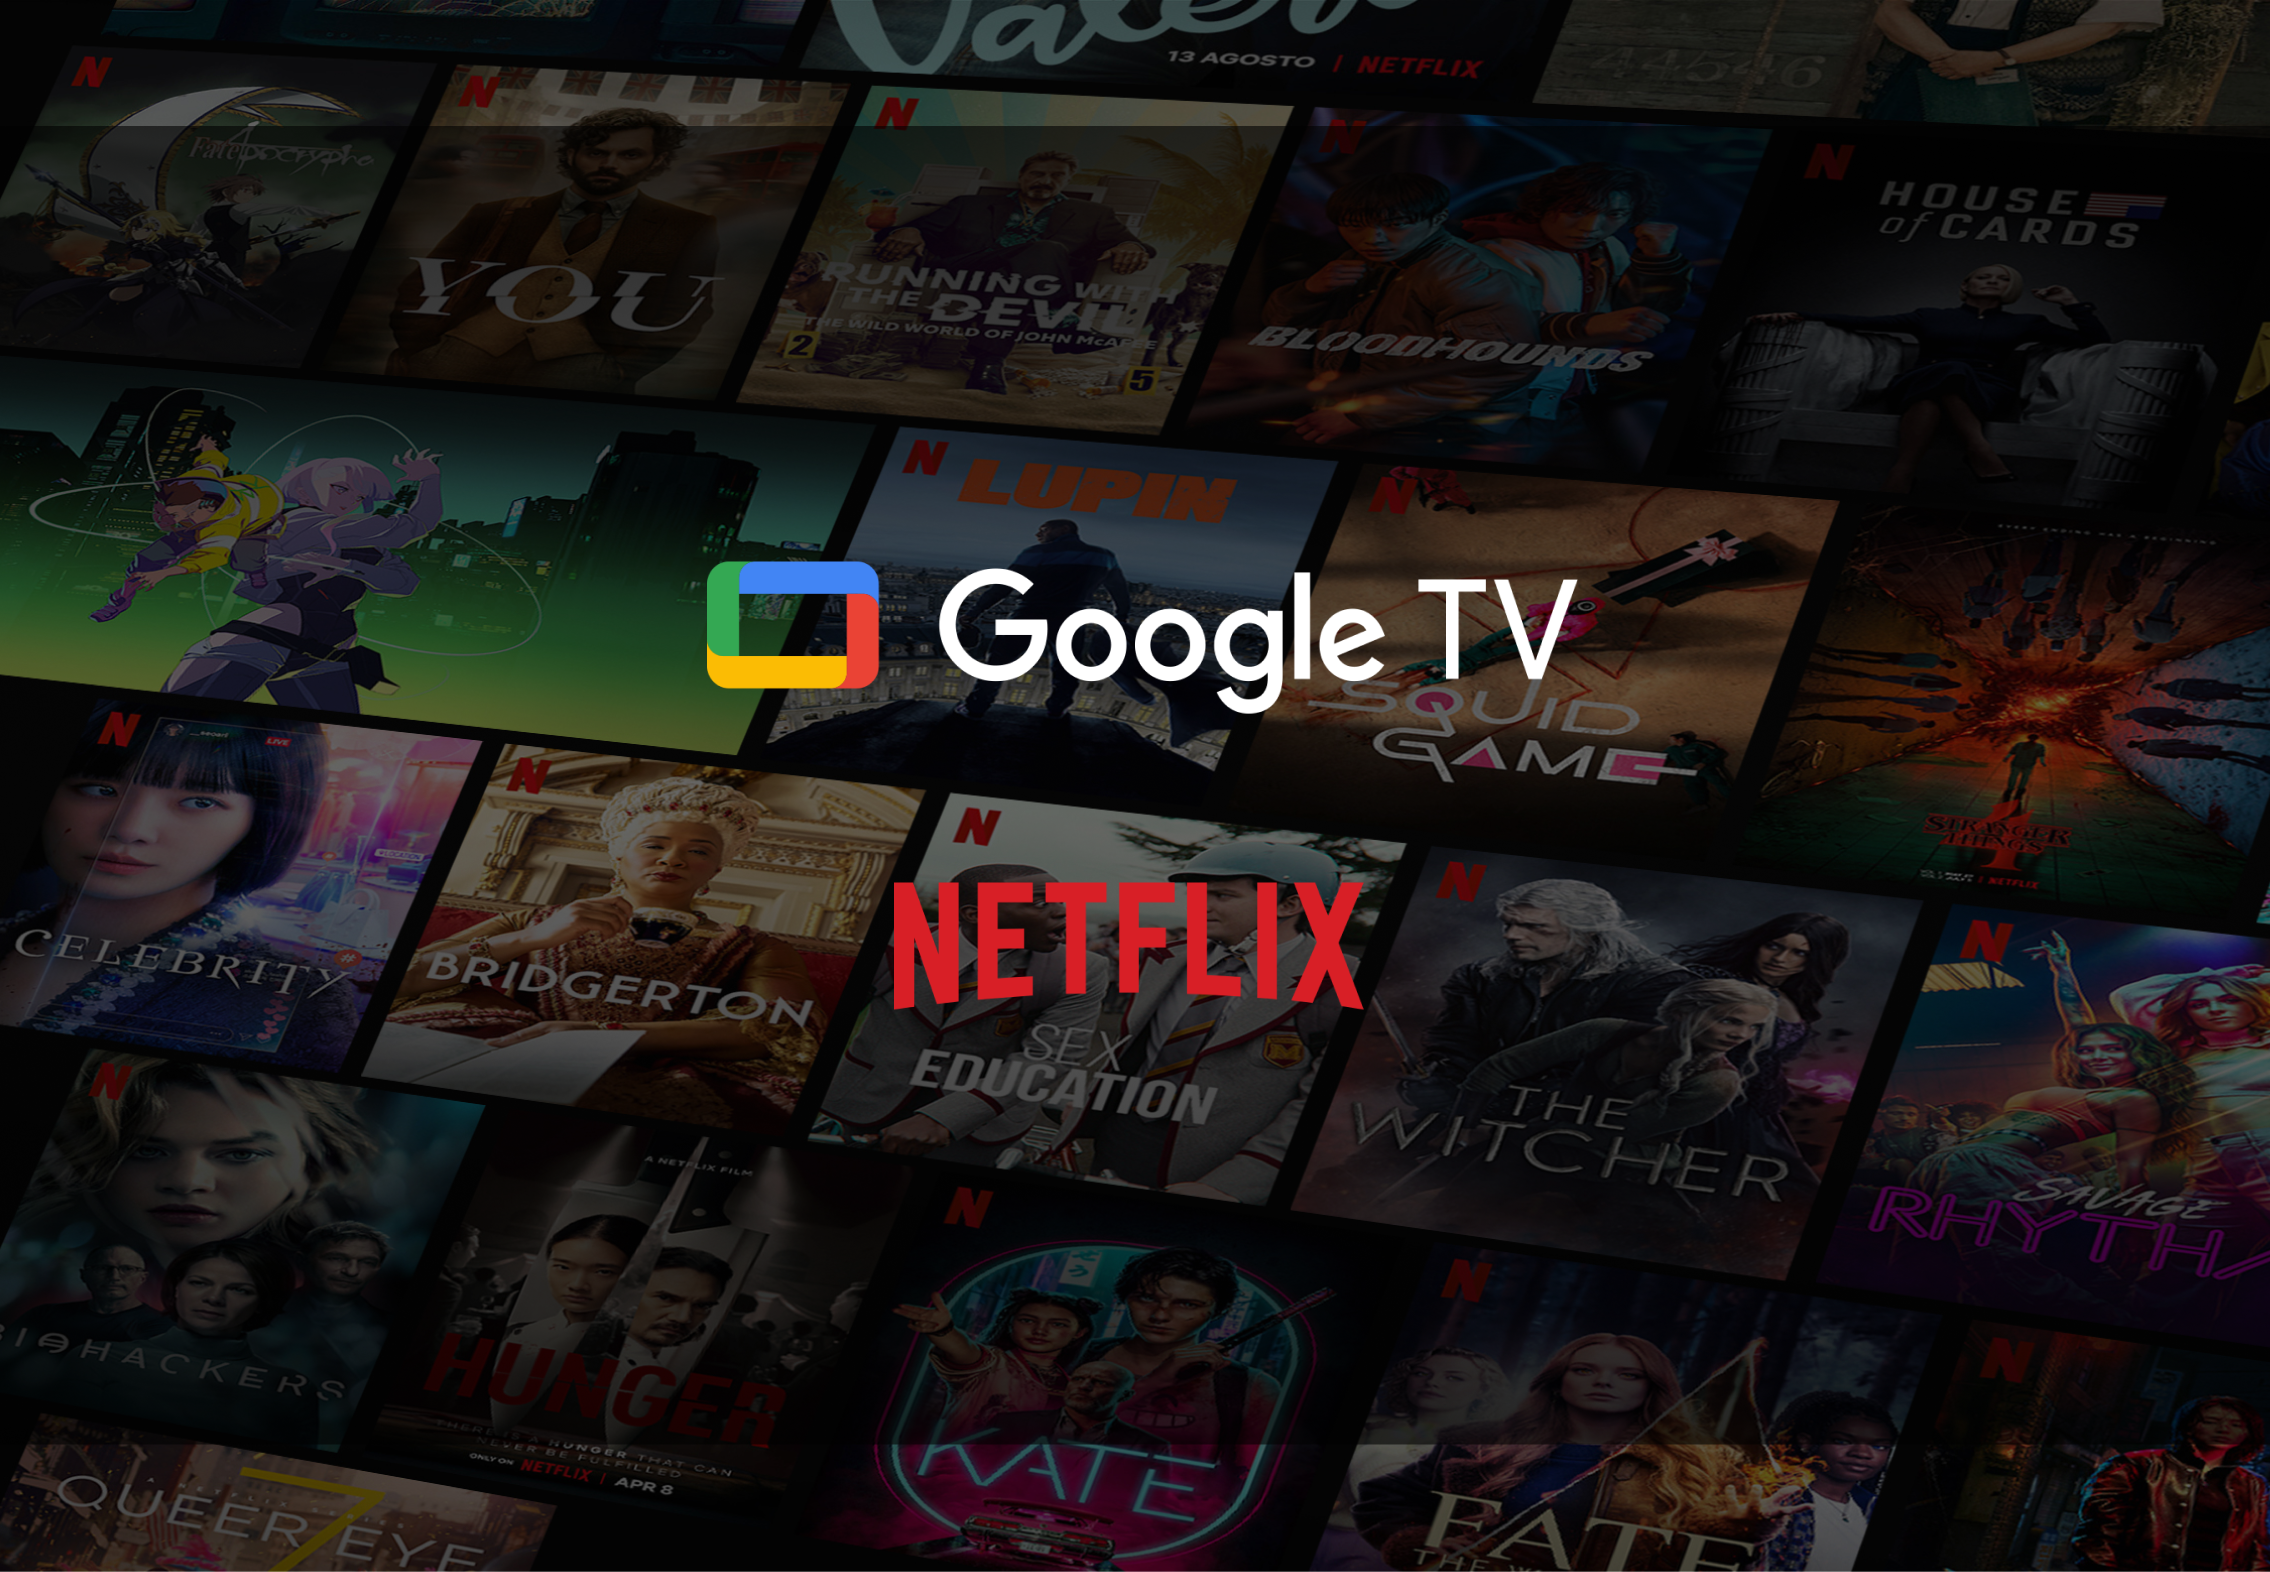 The World's First Google TV LCD Projector with Certified Netflix: Xming Page One